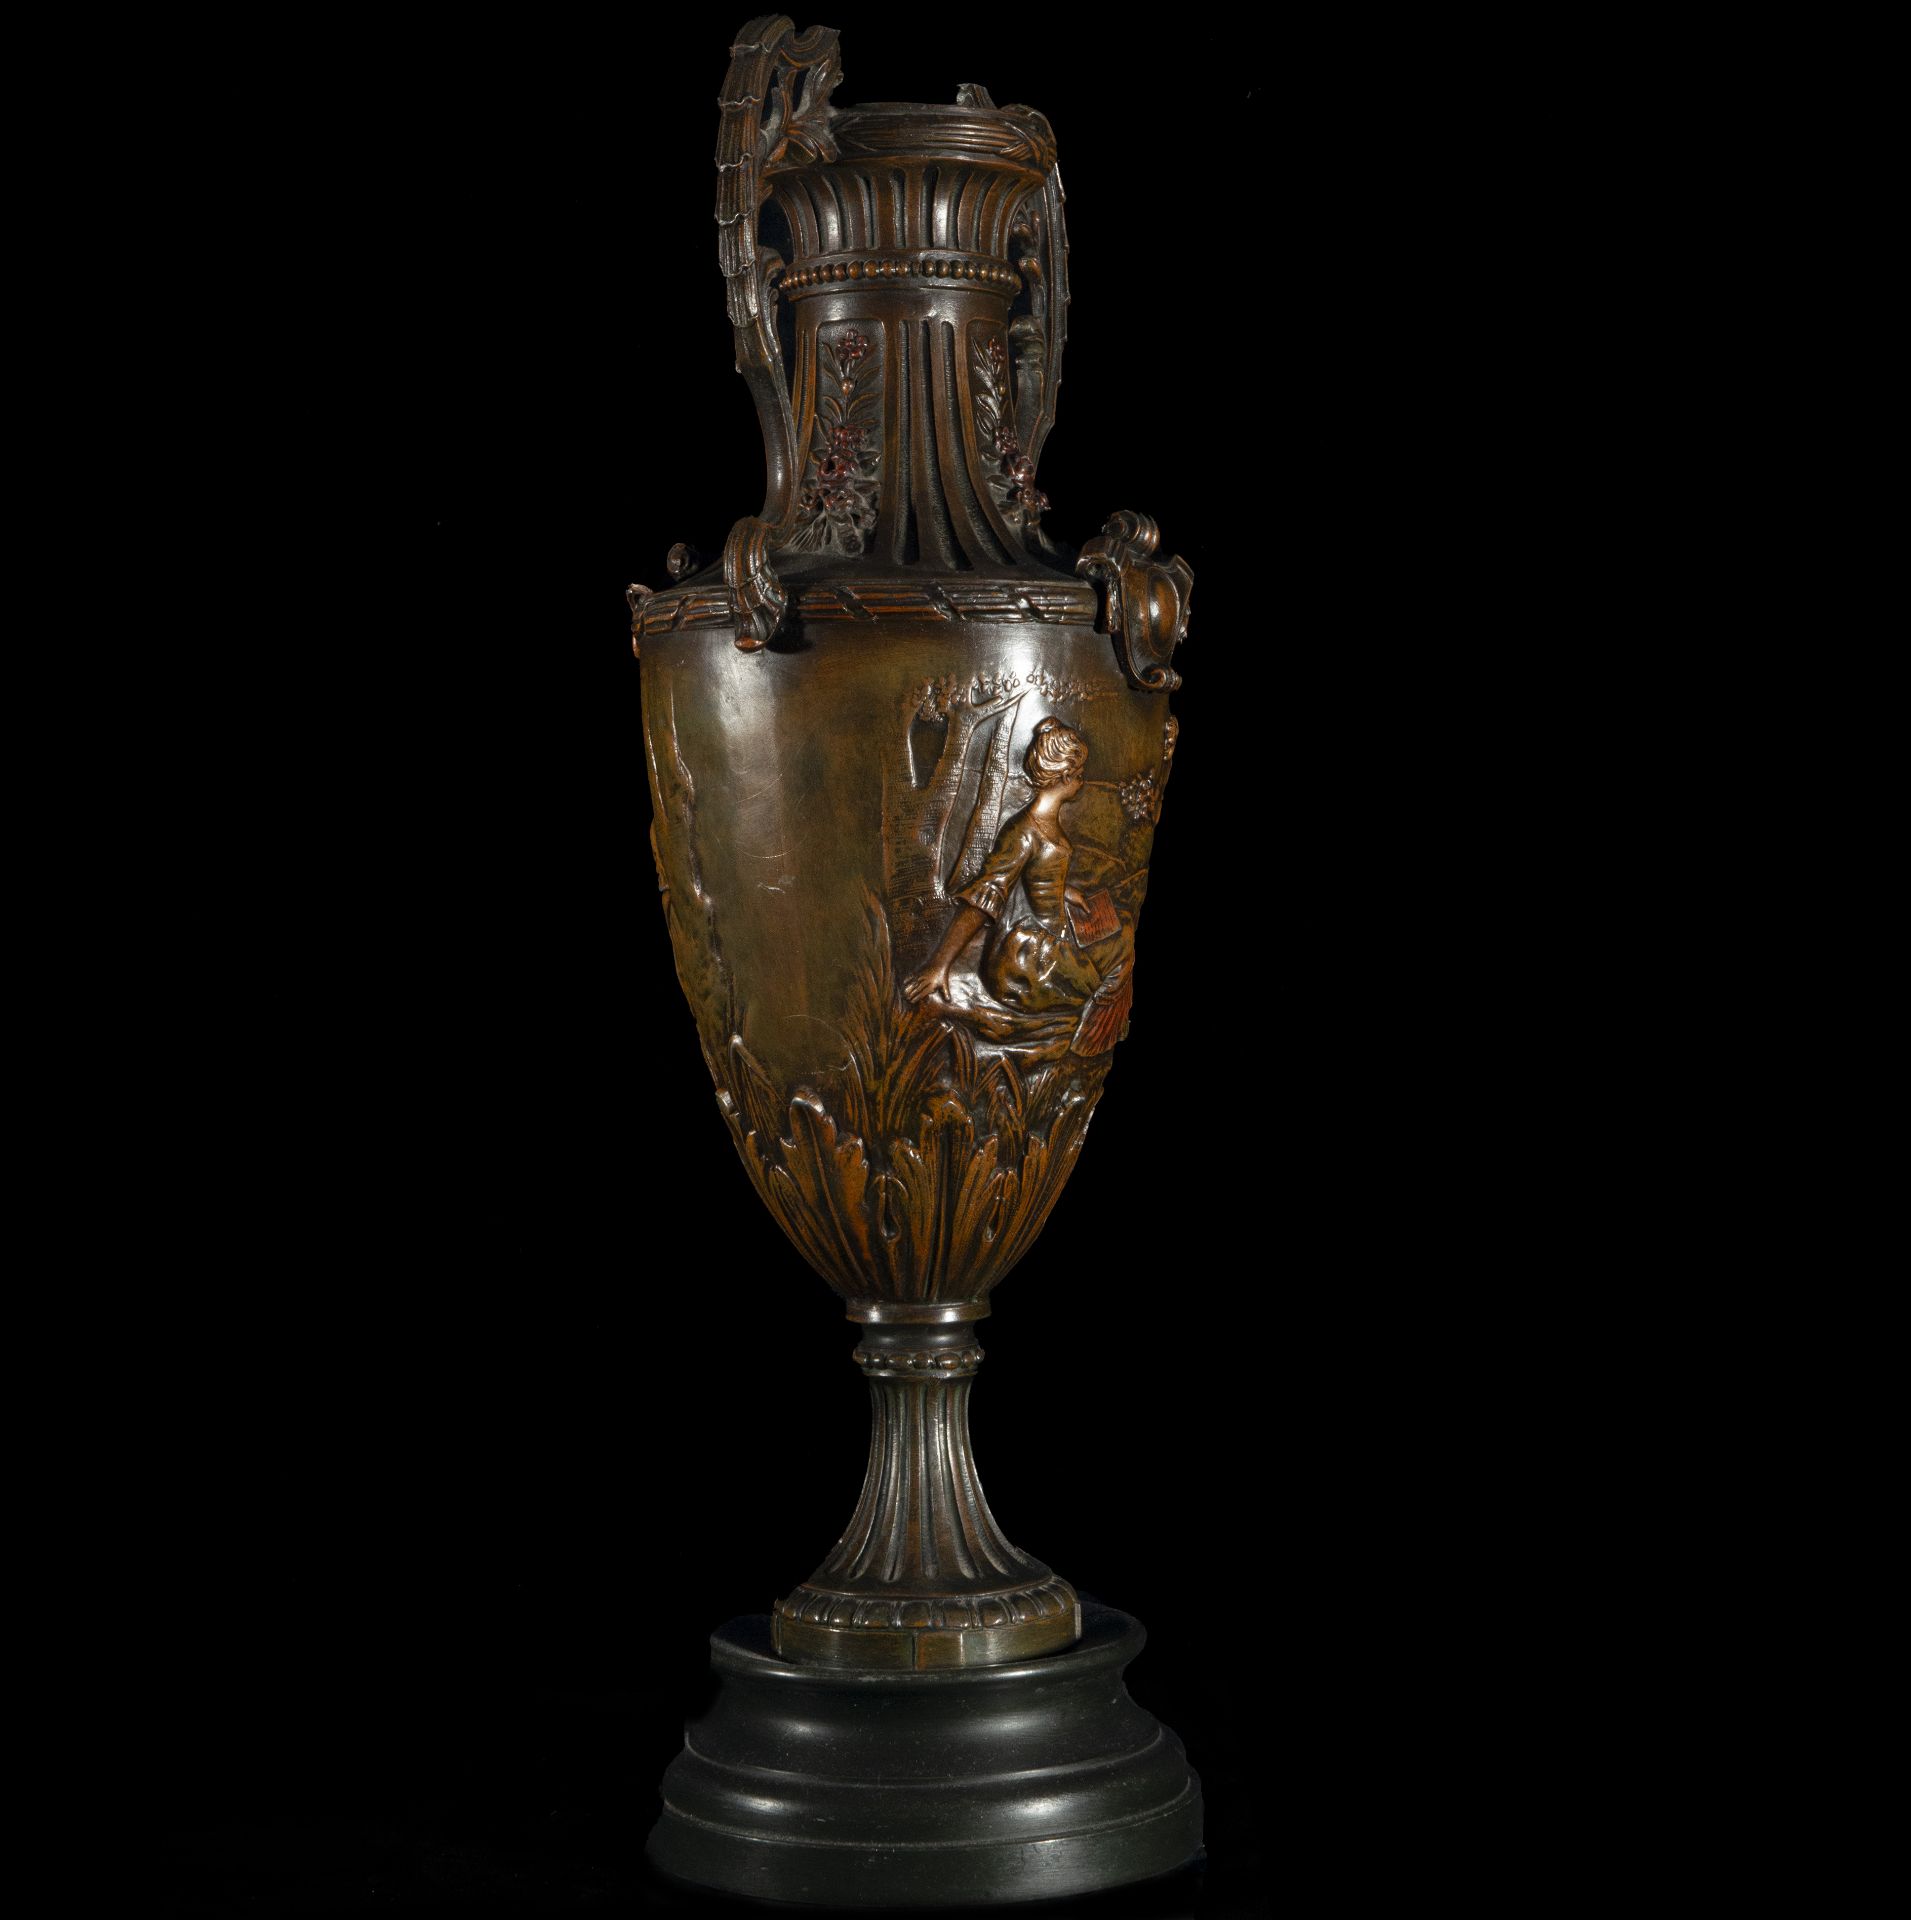 Pair of Neoclassical style glasses from the 19th century - Image 3 of 6